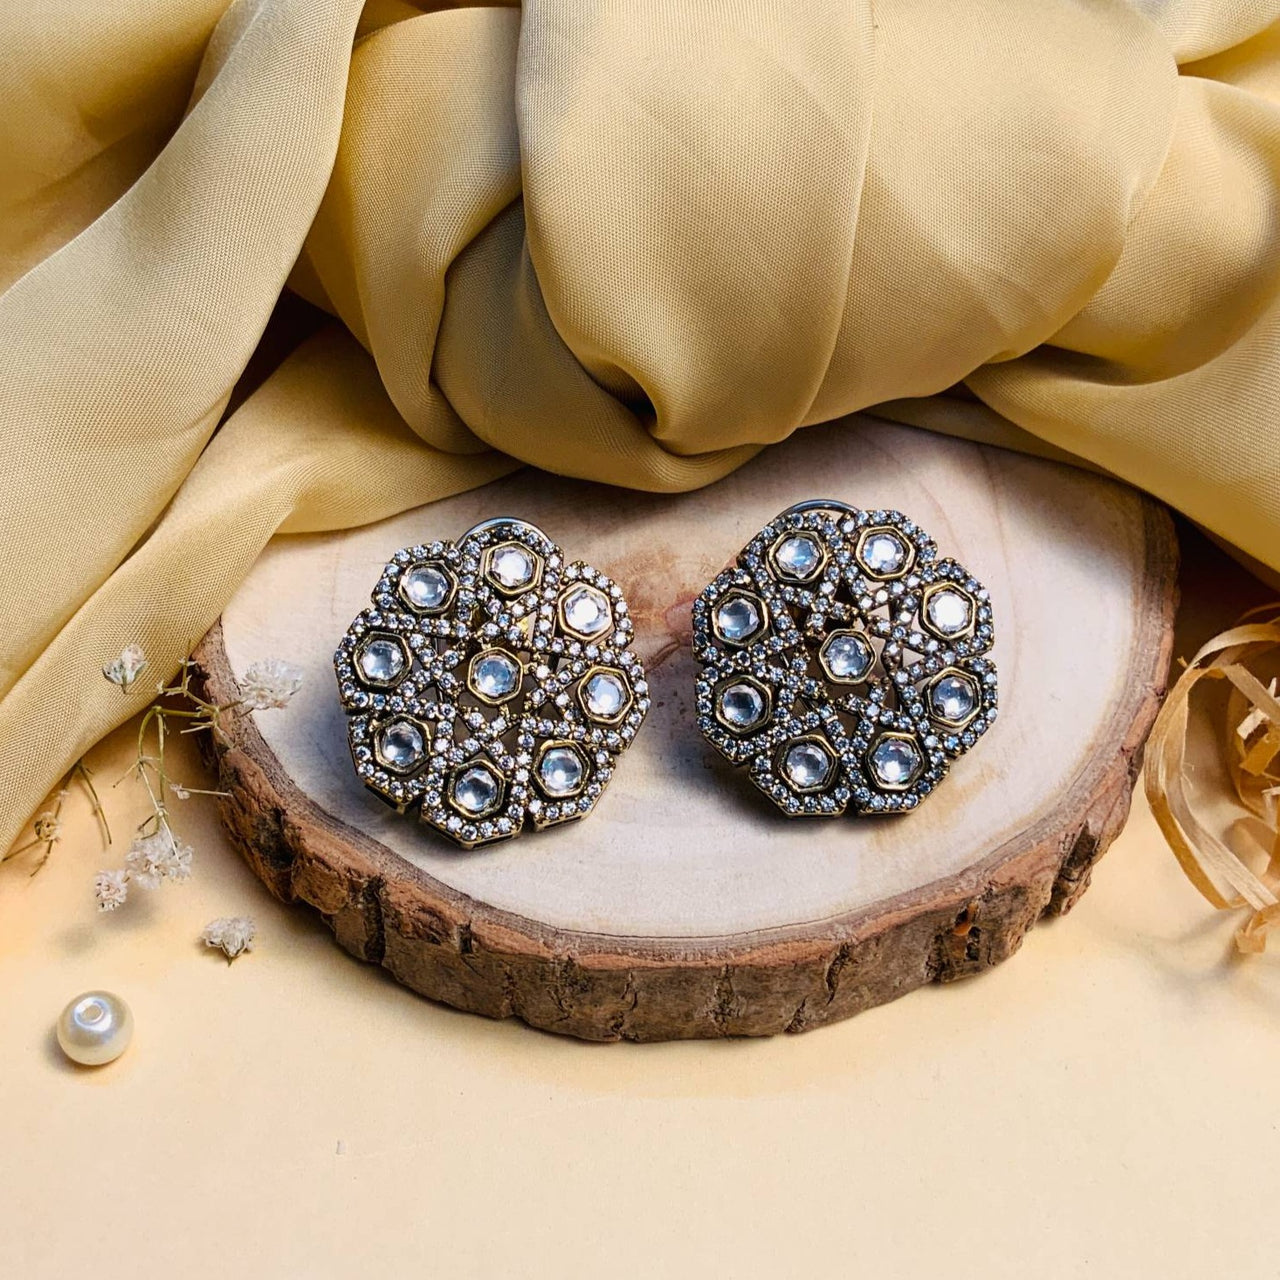 High Quality Victorian Silver Stud Earring